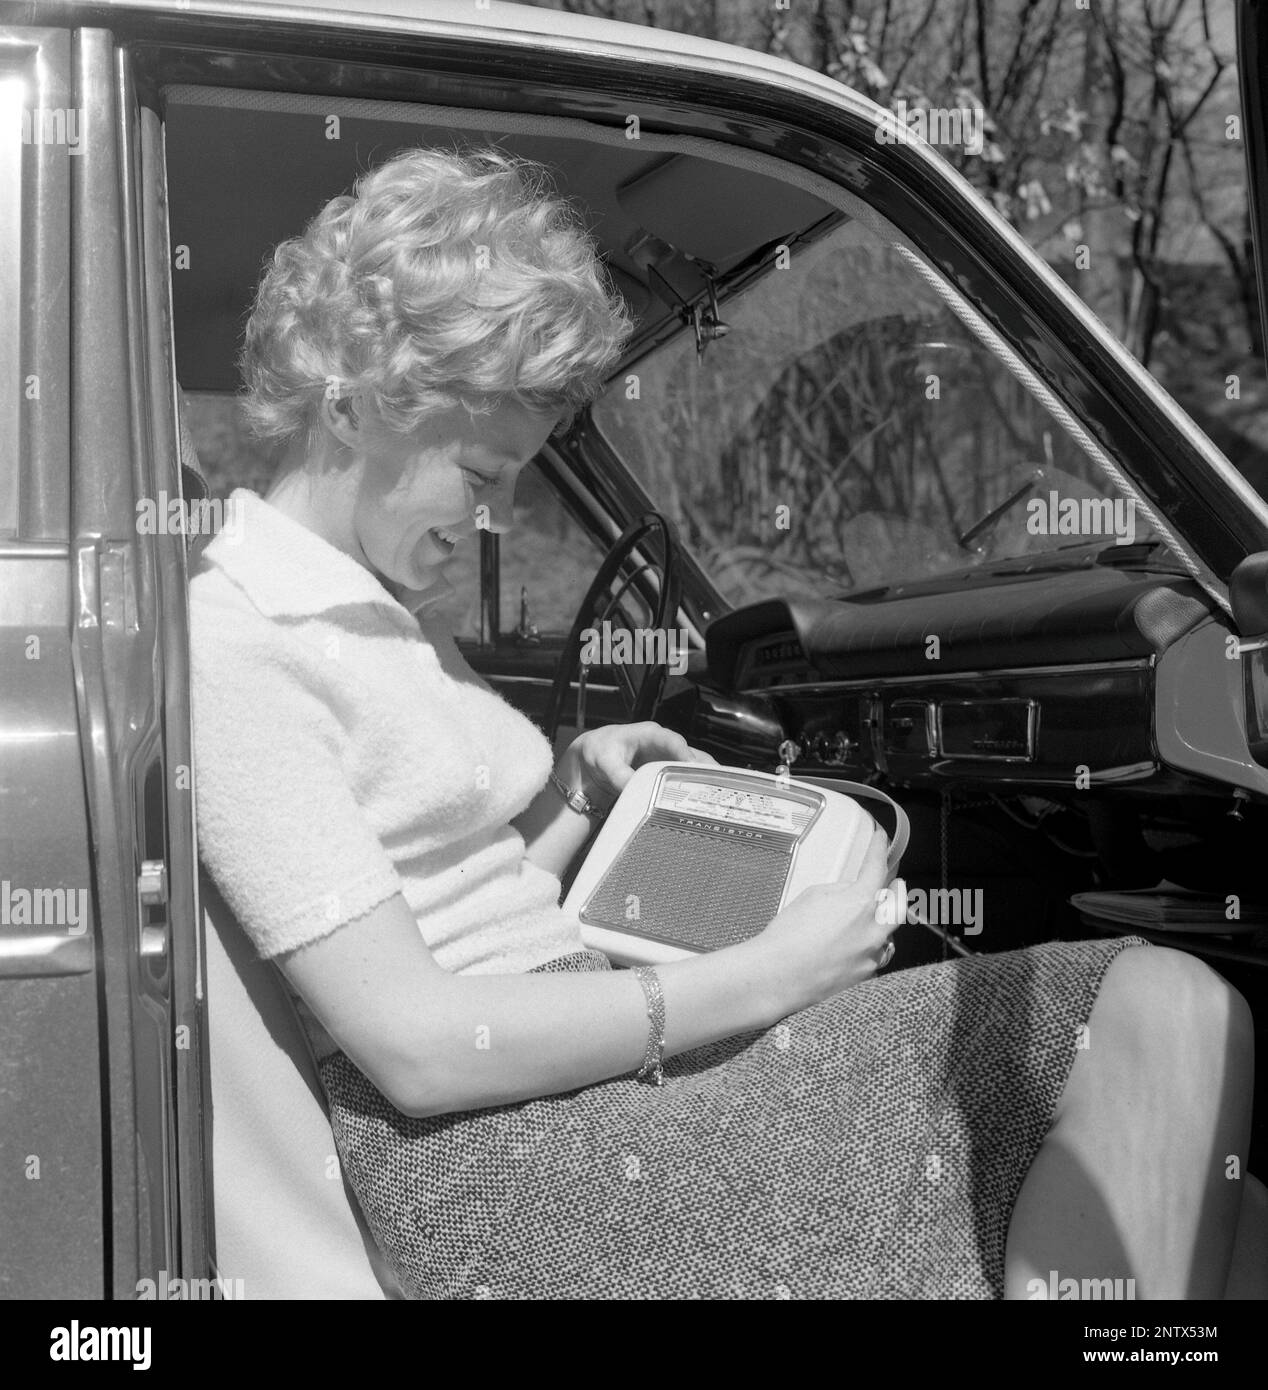 In the 1960s. A young woman in a car listening to a portable radio. Battery operated transistor radio with AM and FM bands. The radiostations and frequenses are displayed on the front, and a knob to turn and adjust to get best possible reception. Sweden 1960 Conard ref 4220 Stock Photo